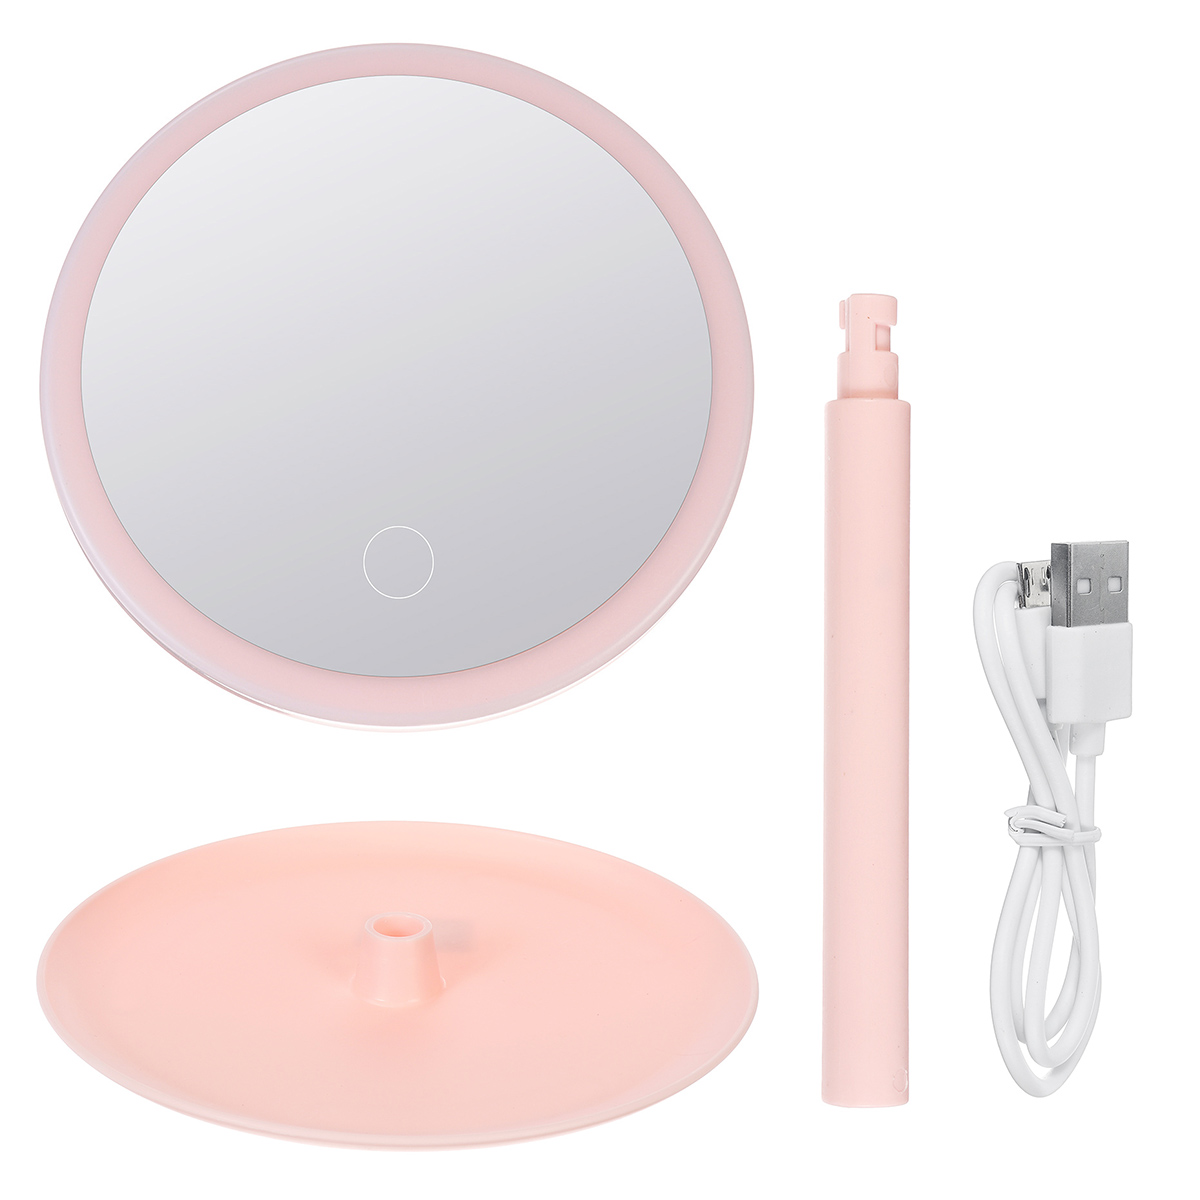 5W-USB-Rechargeable-LED-Mirror-Light-Dimmable-Make-Up-Vanity-Desktop-Cosmetic-Lamp-1774511-9